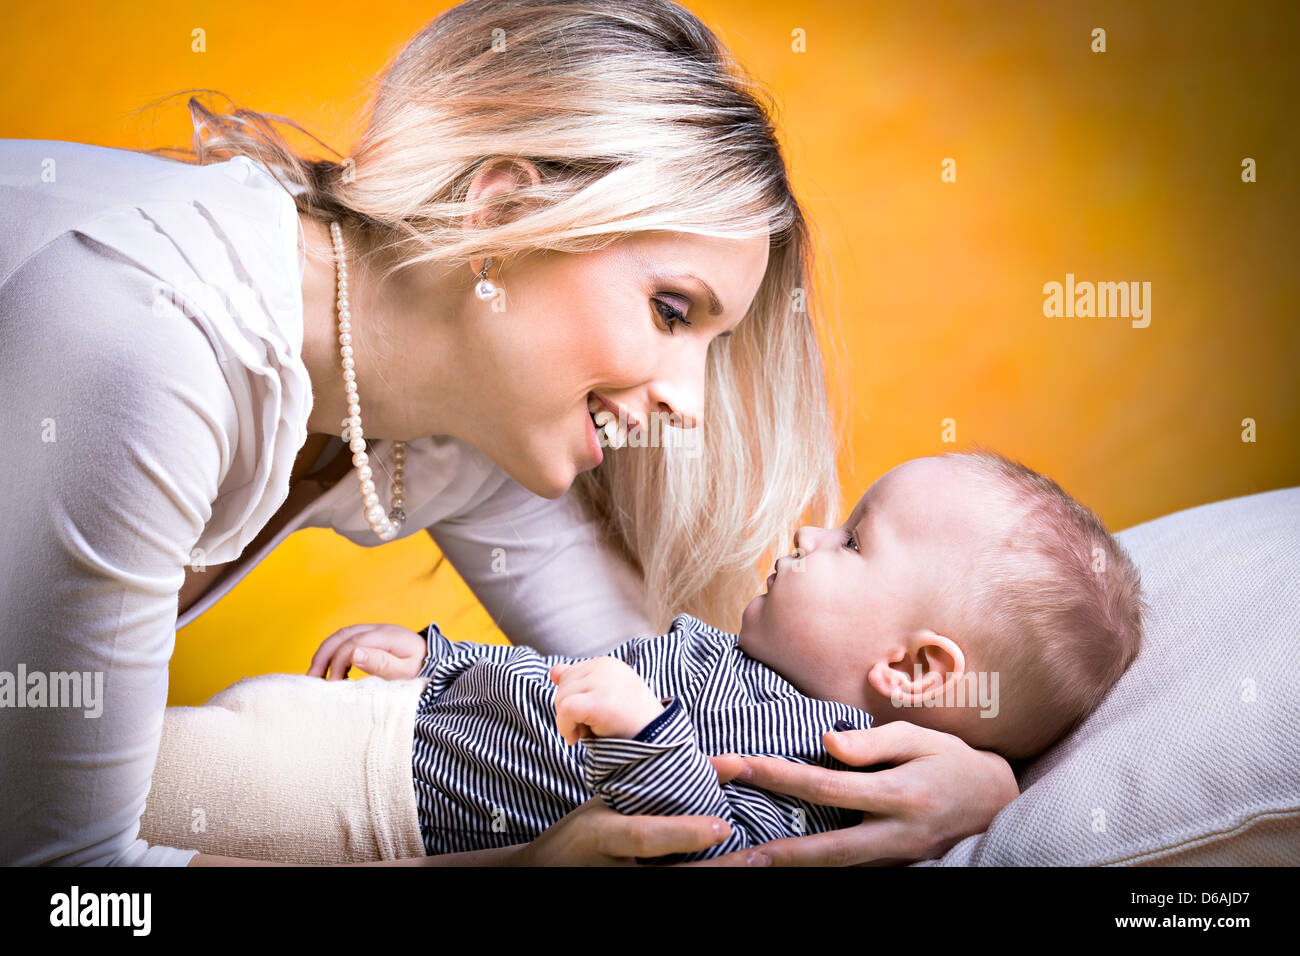 mother and son portrait Stock Photo